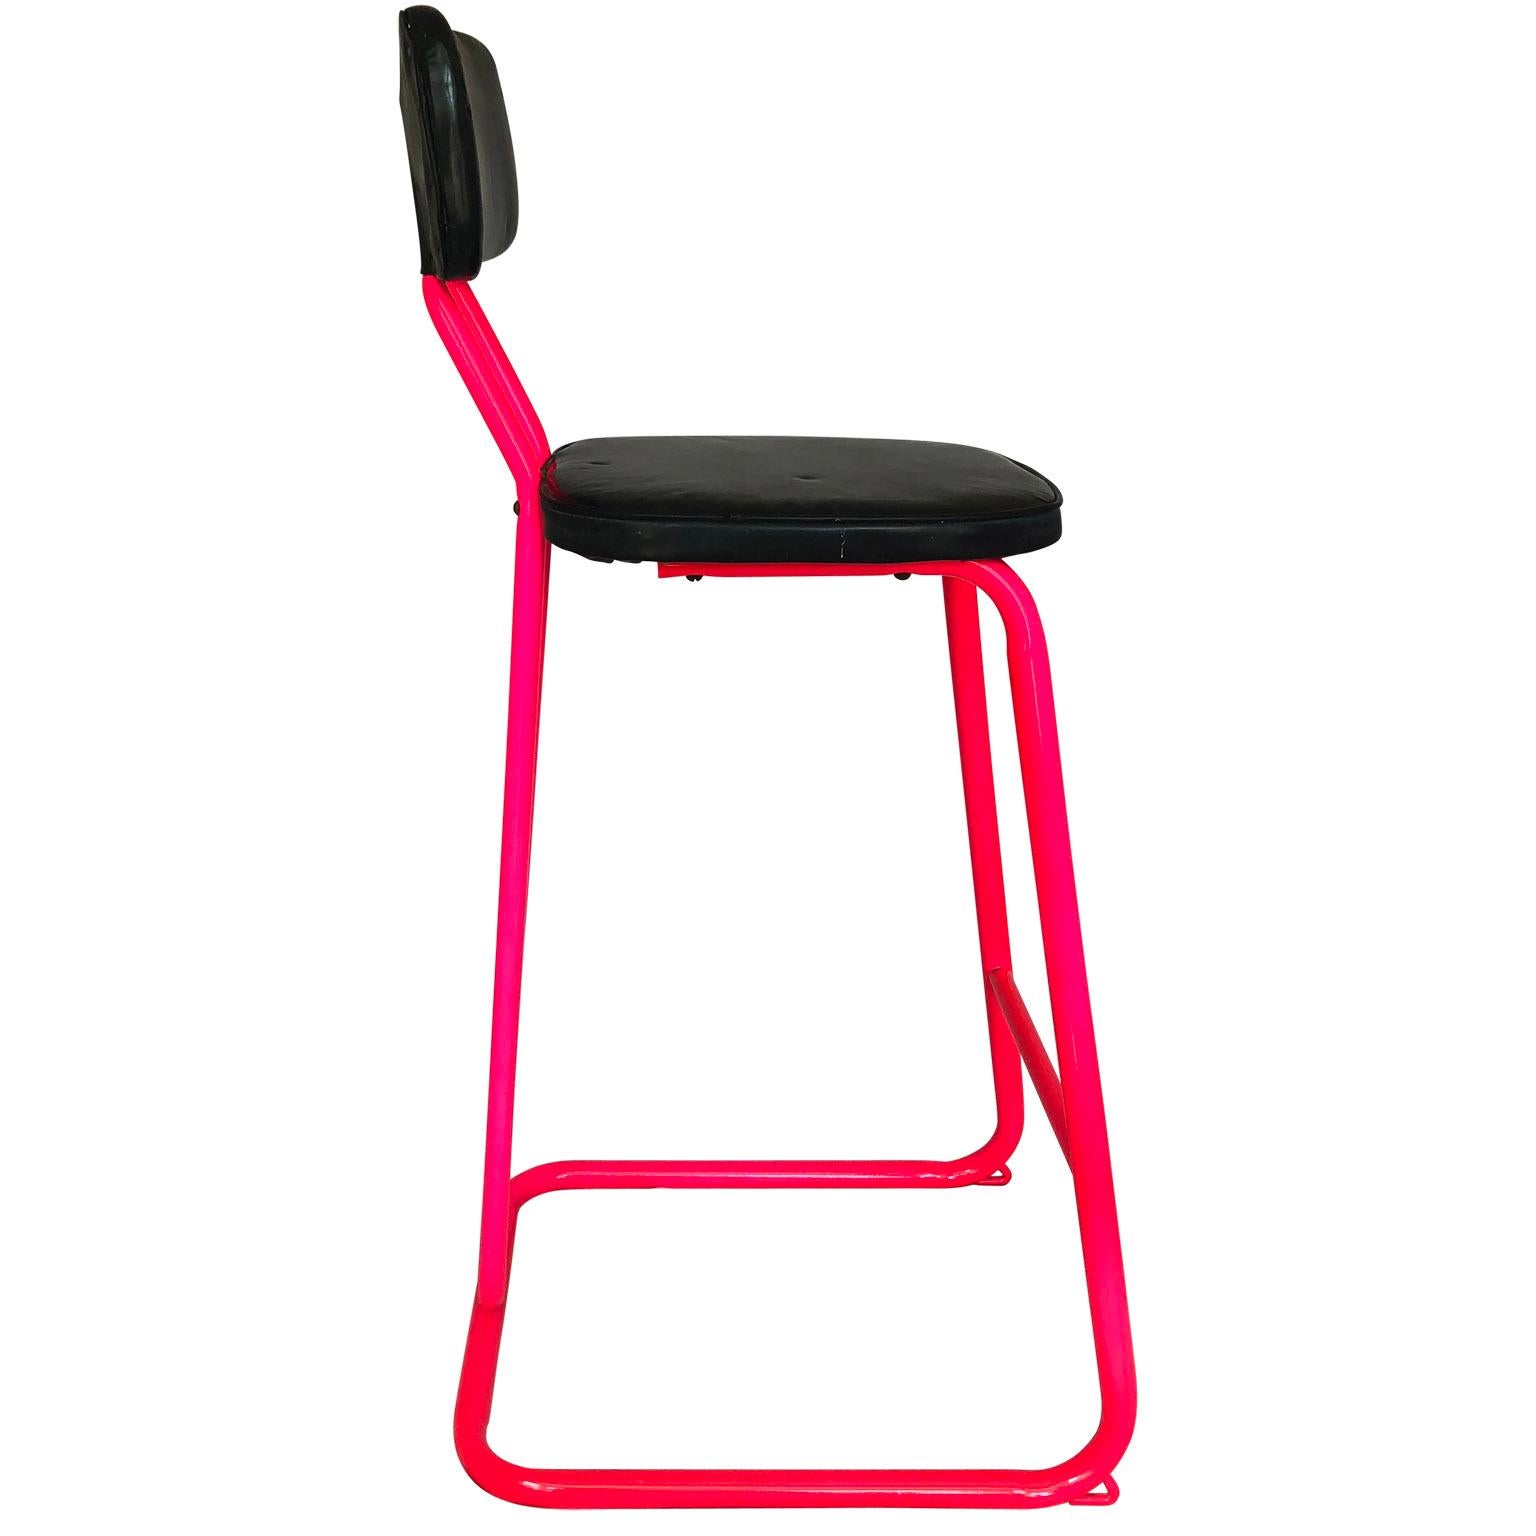 Powder-Coated Mid-Century Modern Pink Bar Stool By Daystrom And Knoll For Sale